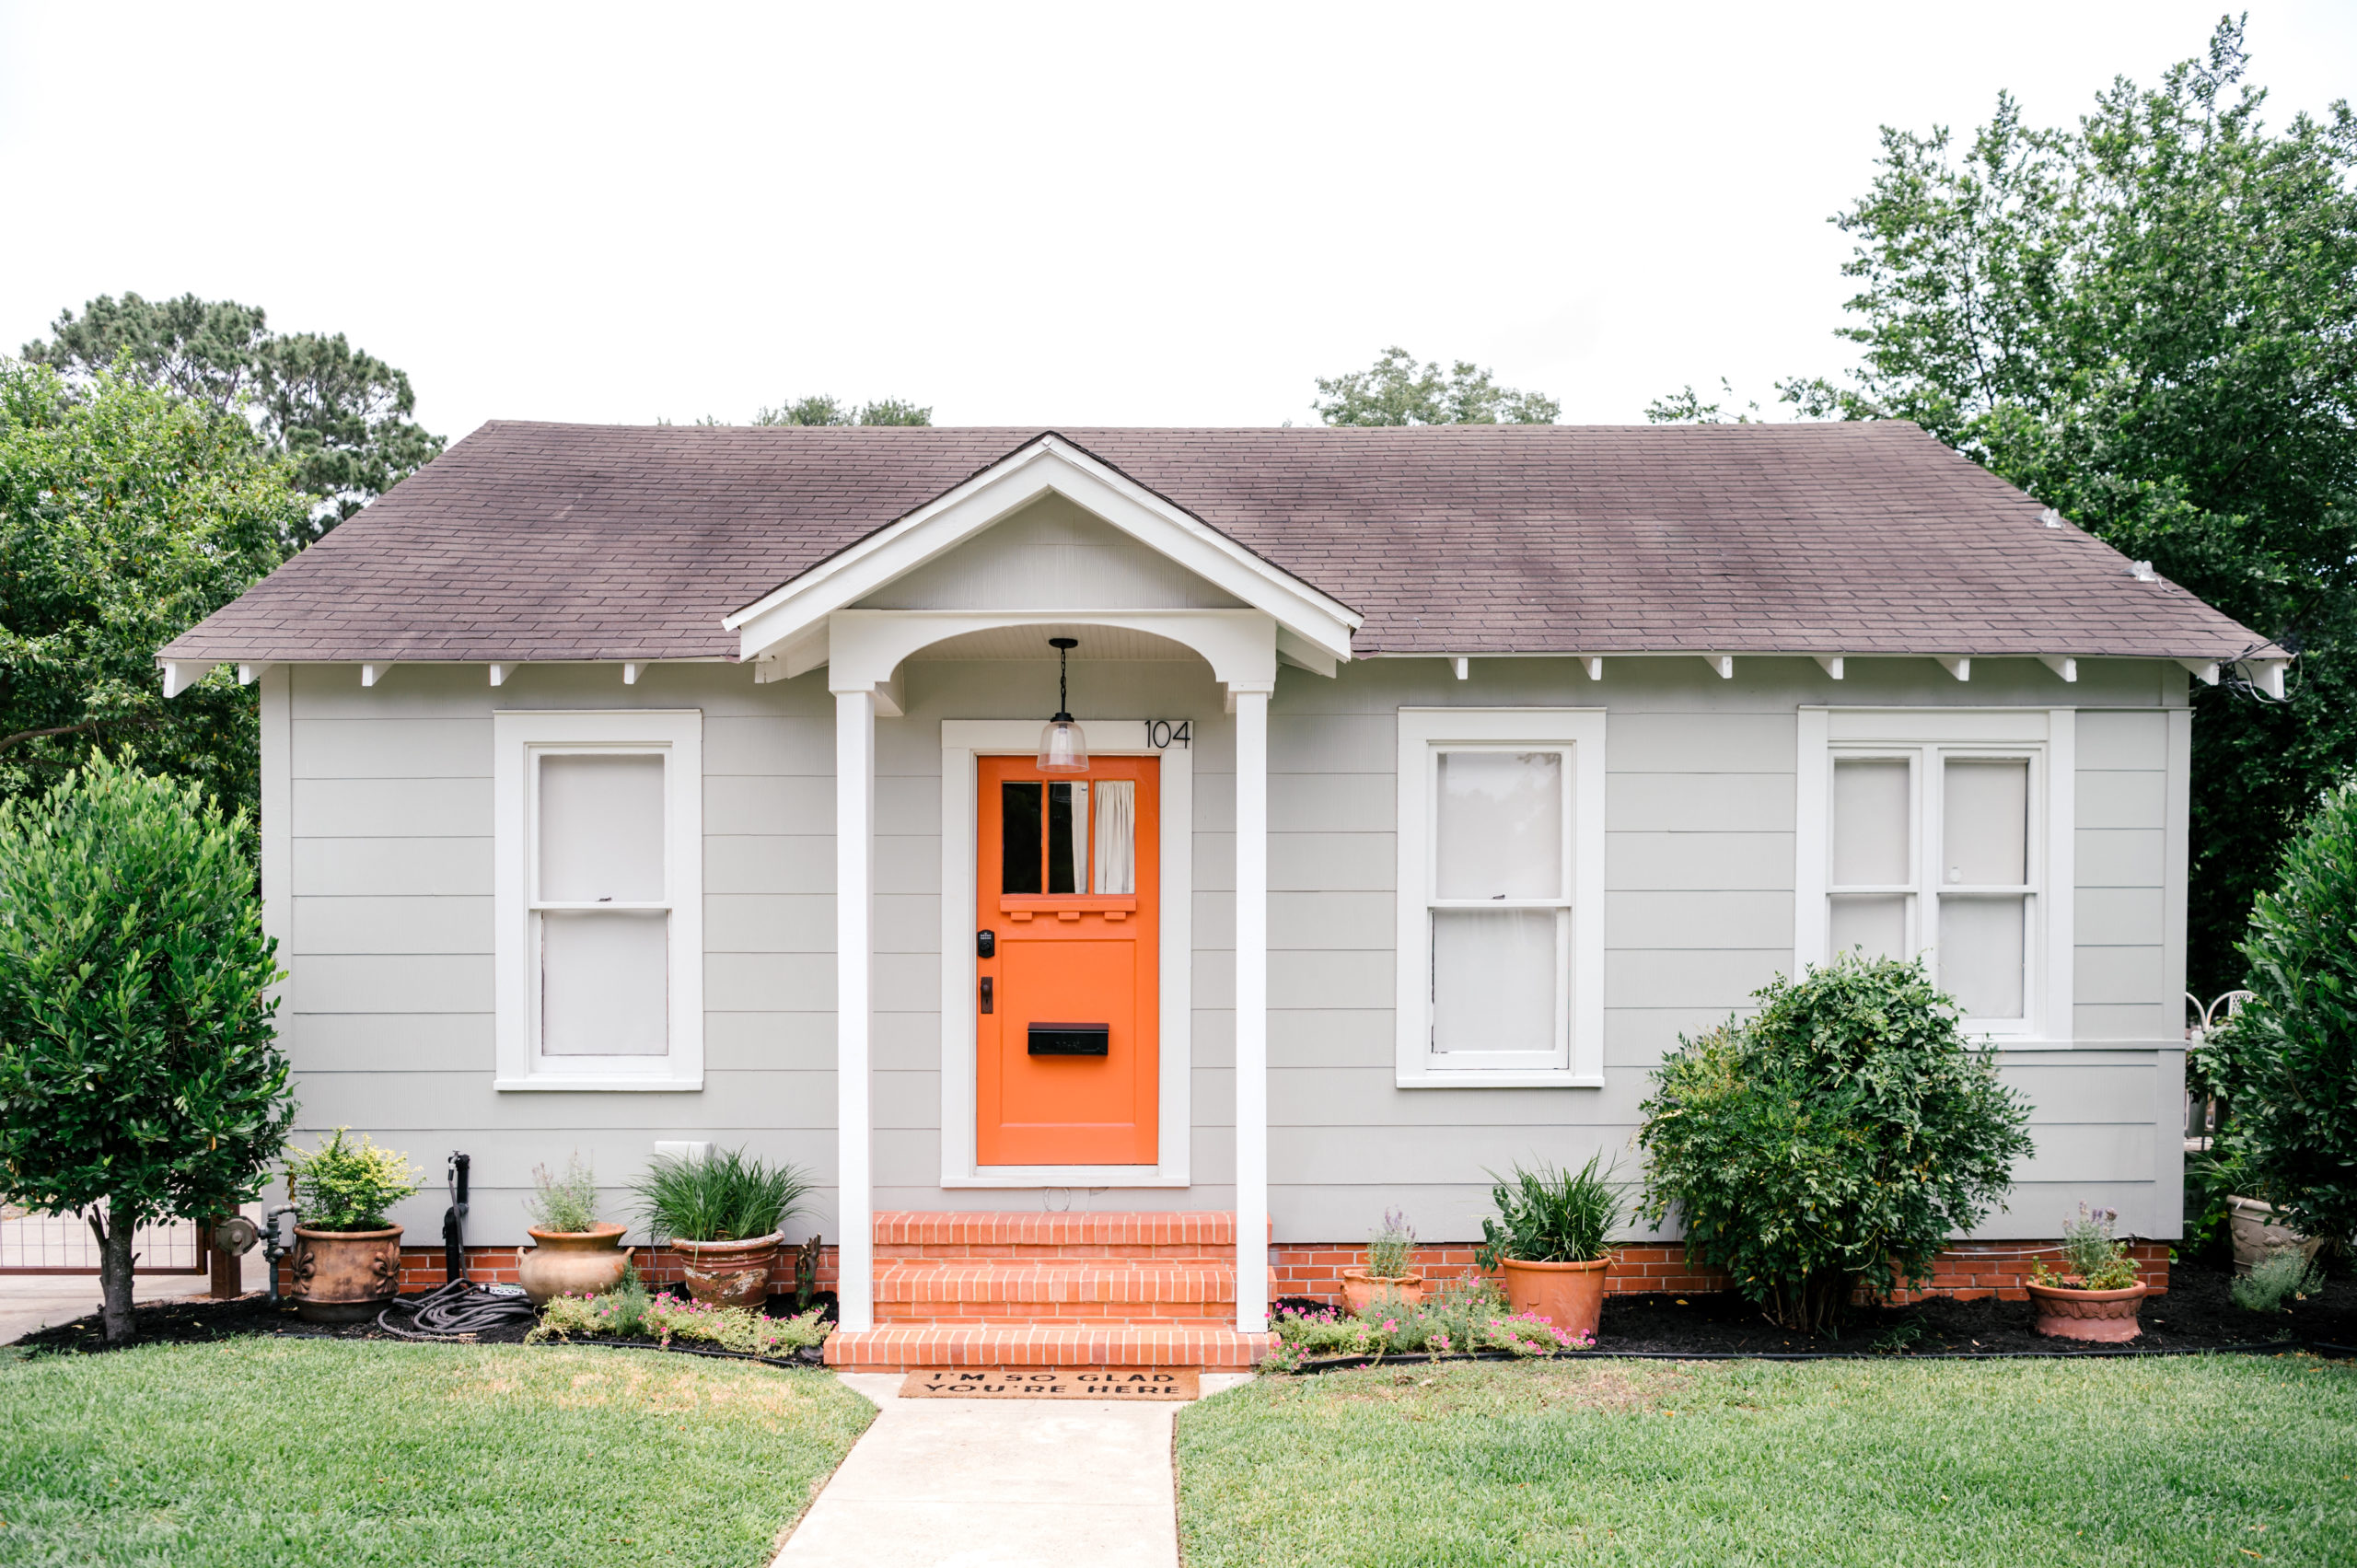 Short-term Rental Photos of the exterior of a grey one story home with an orange door and steps